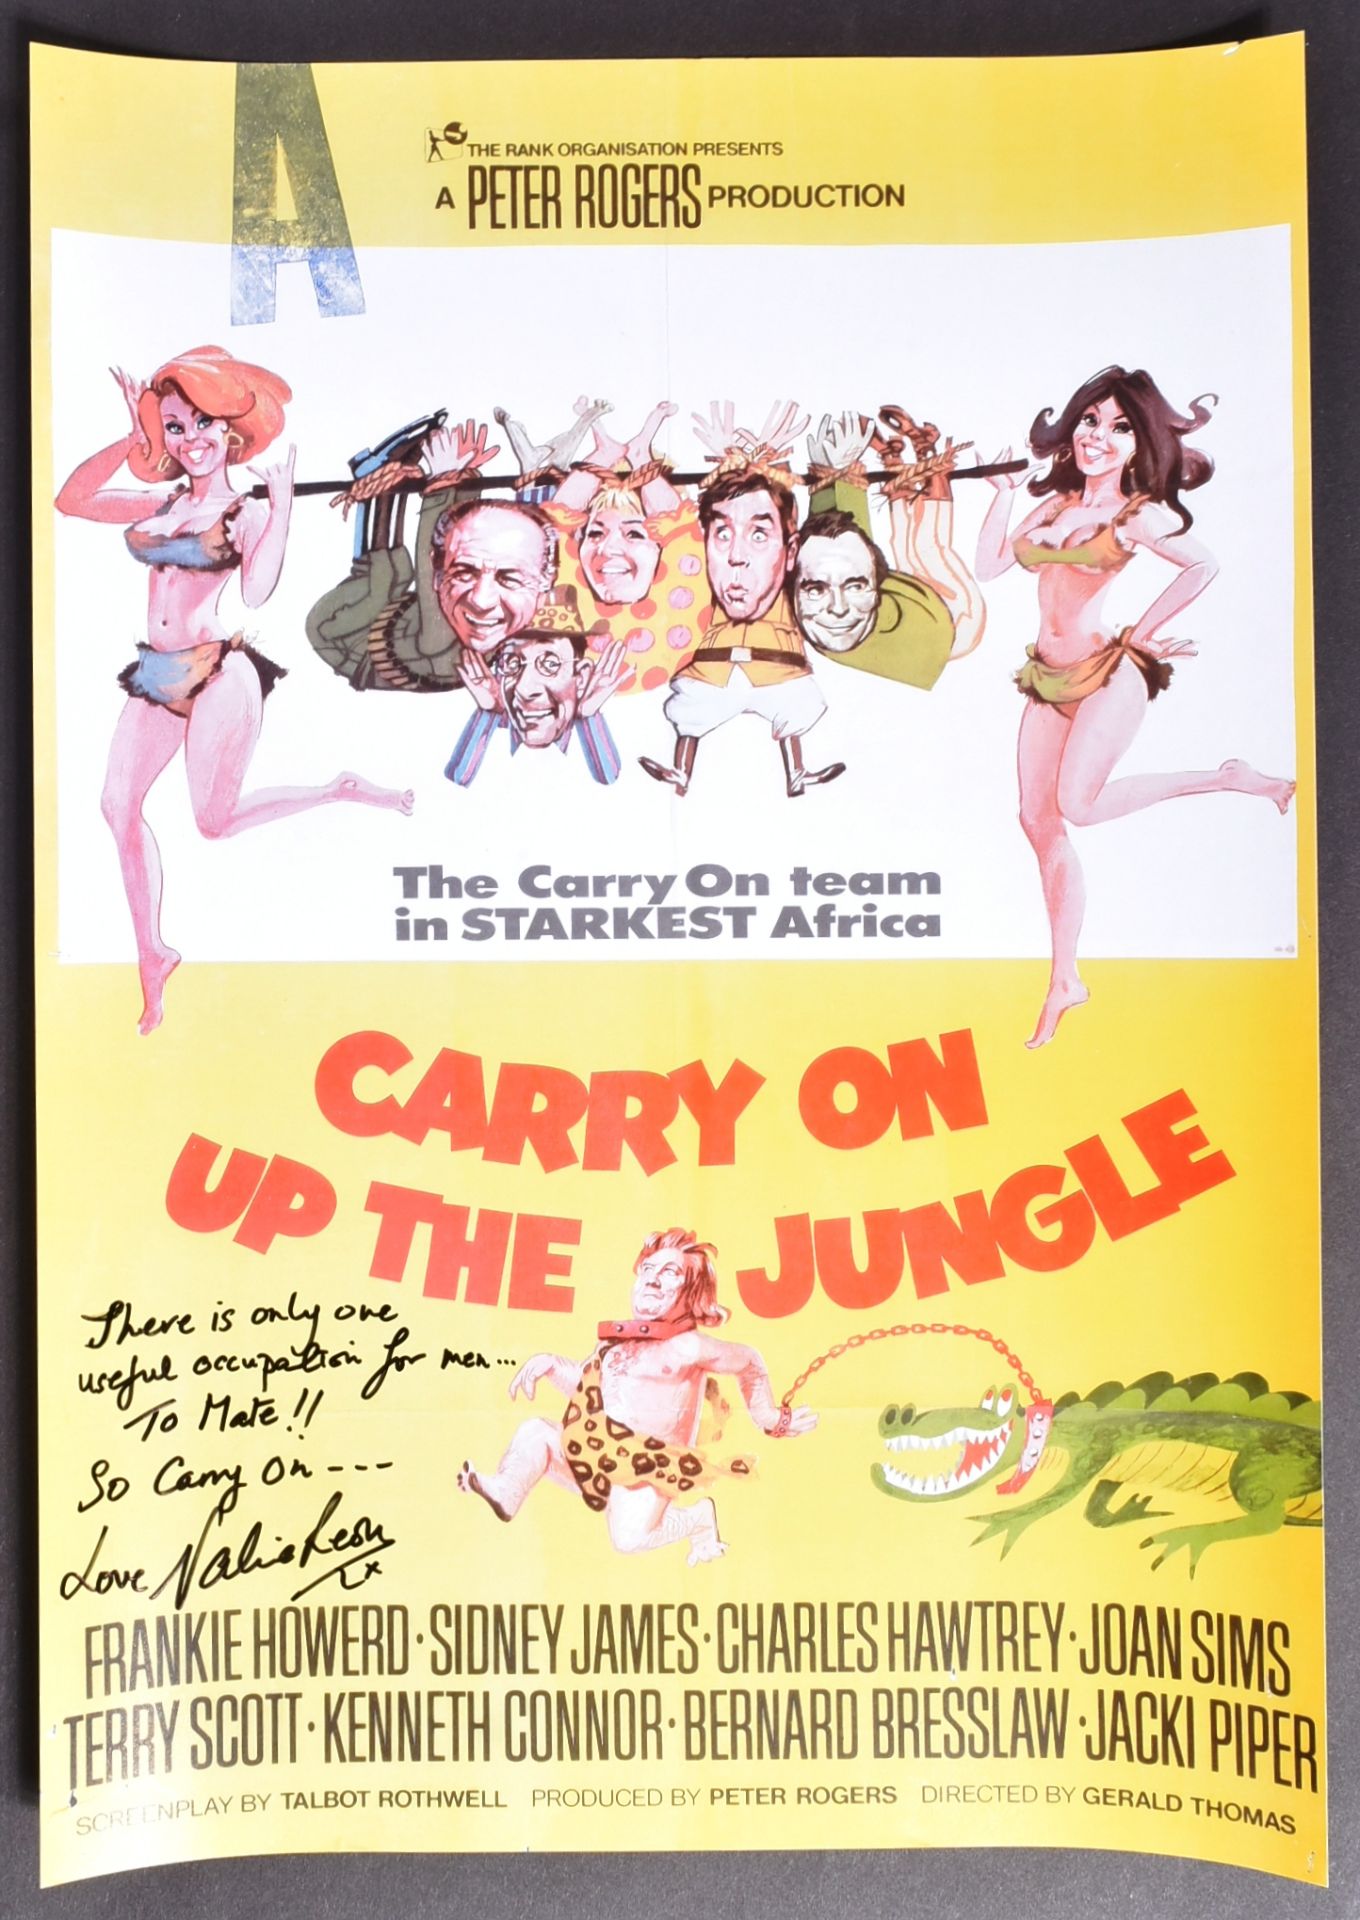 CARRY ON UP THE JUNGLE (1970) - VALERIE LEON SIGNED POSTER - Image 2 of 3